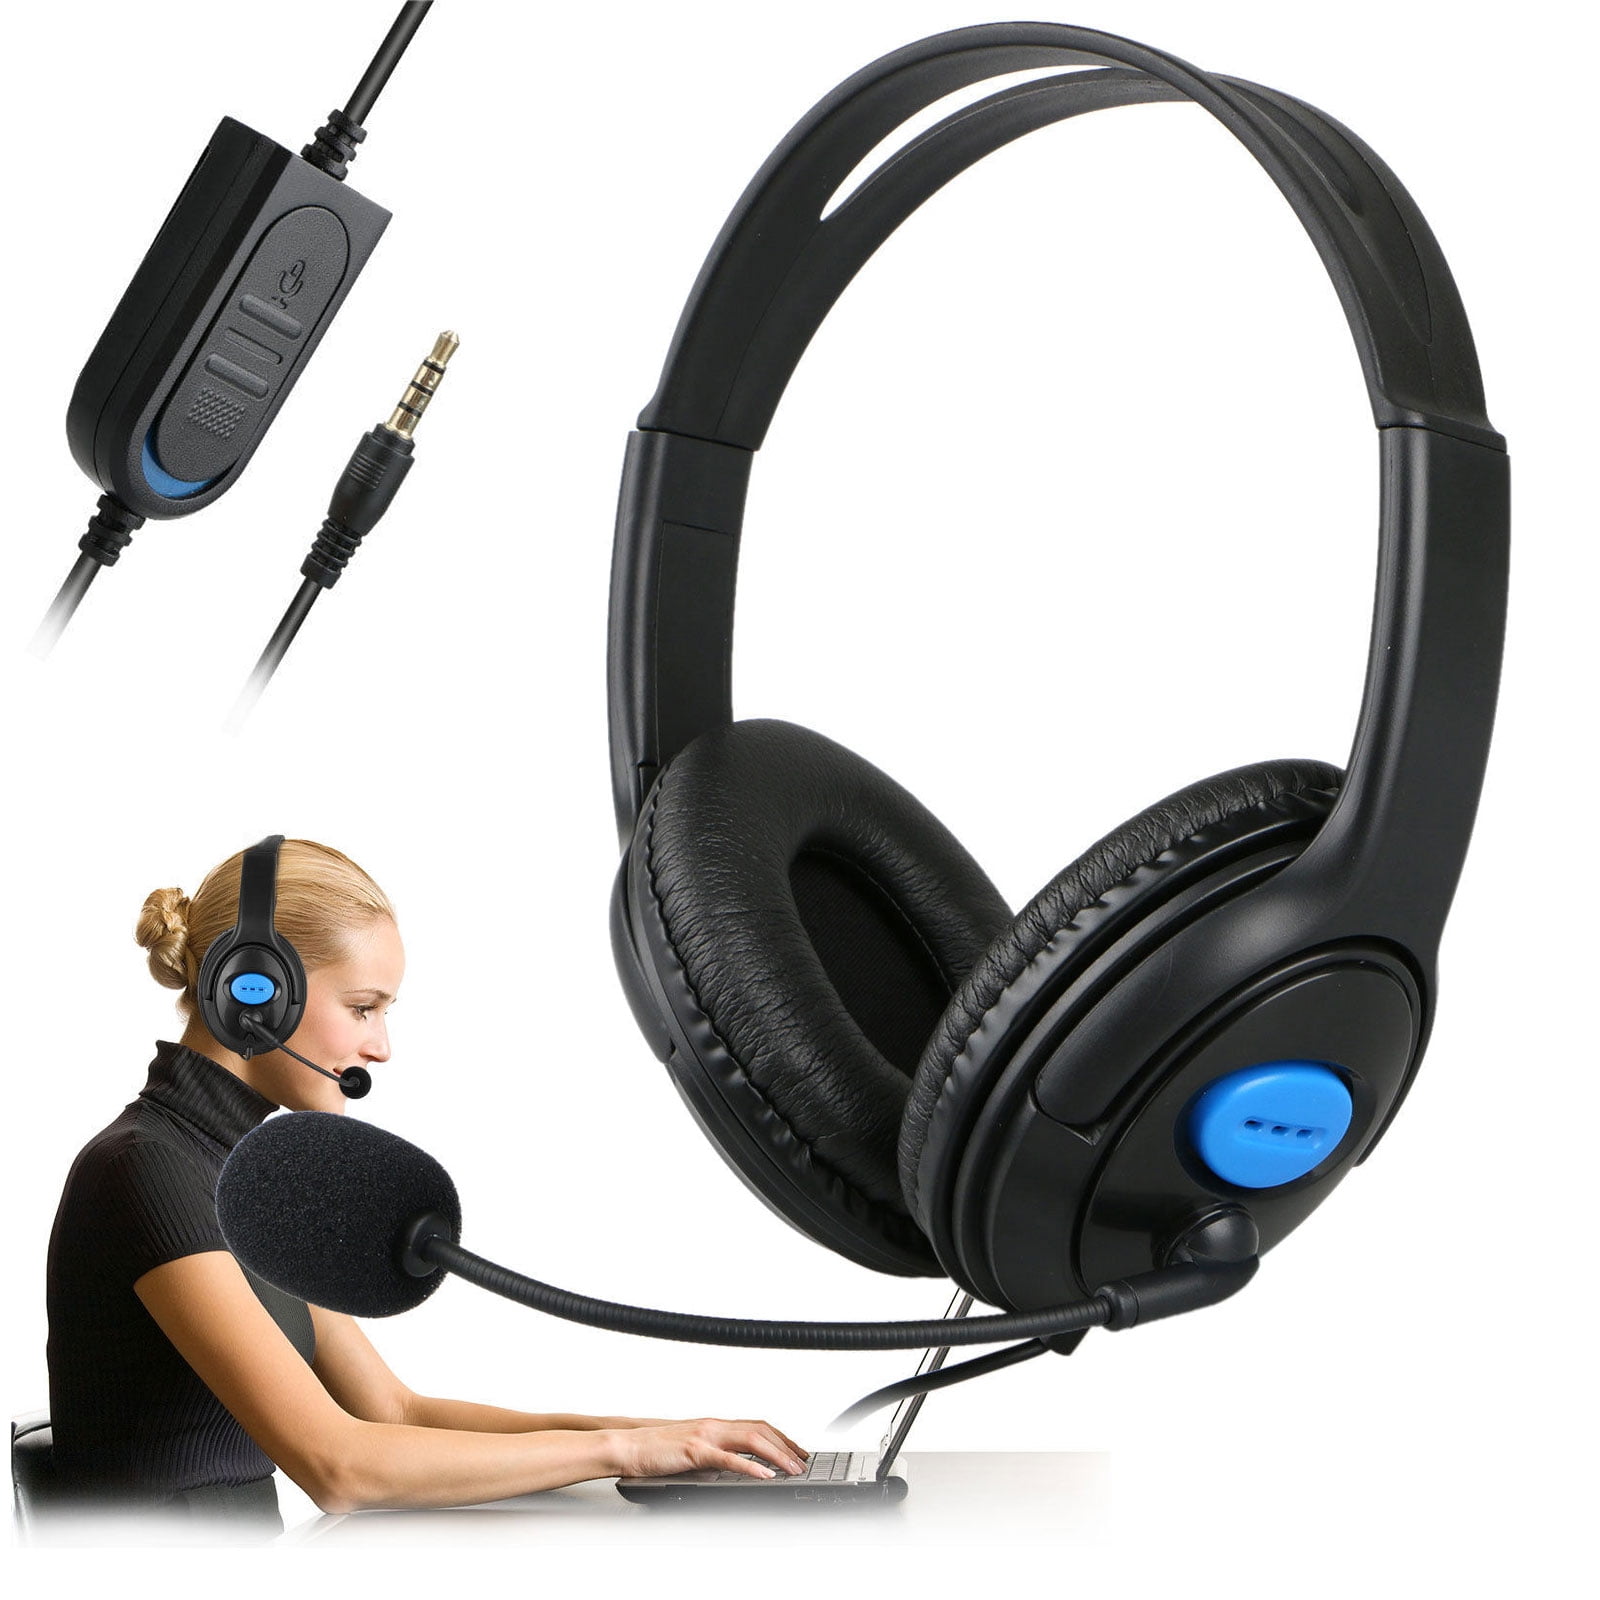 Eummit Headset Gaming Headset,3.5mm Wired HD Voice Headphones with Microphone for PC/PS3/For PS4/for Xbox 360/for Xbox ONE Game Consoles 